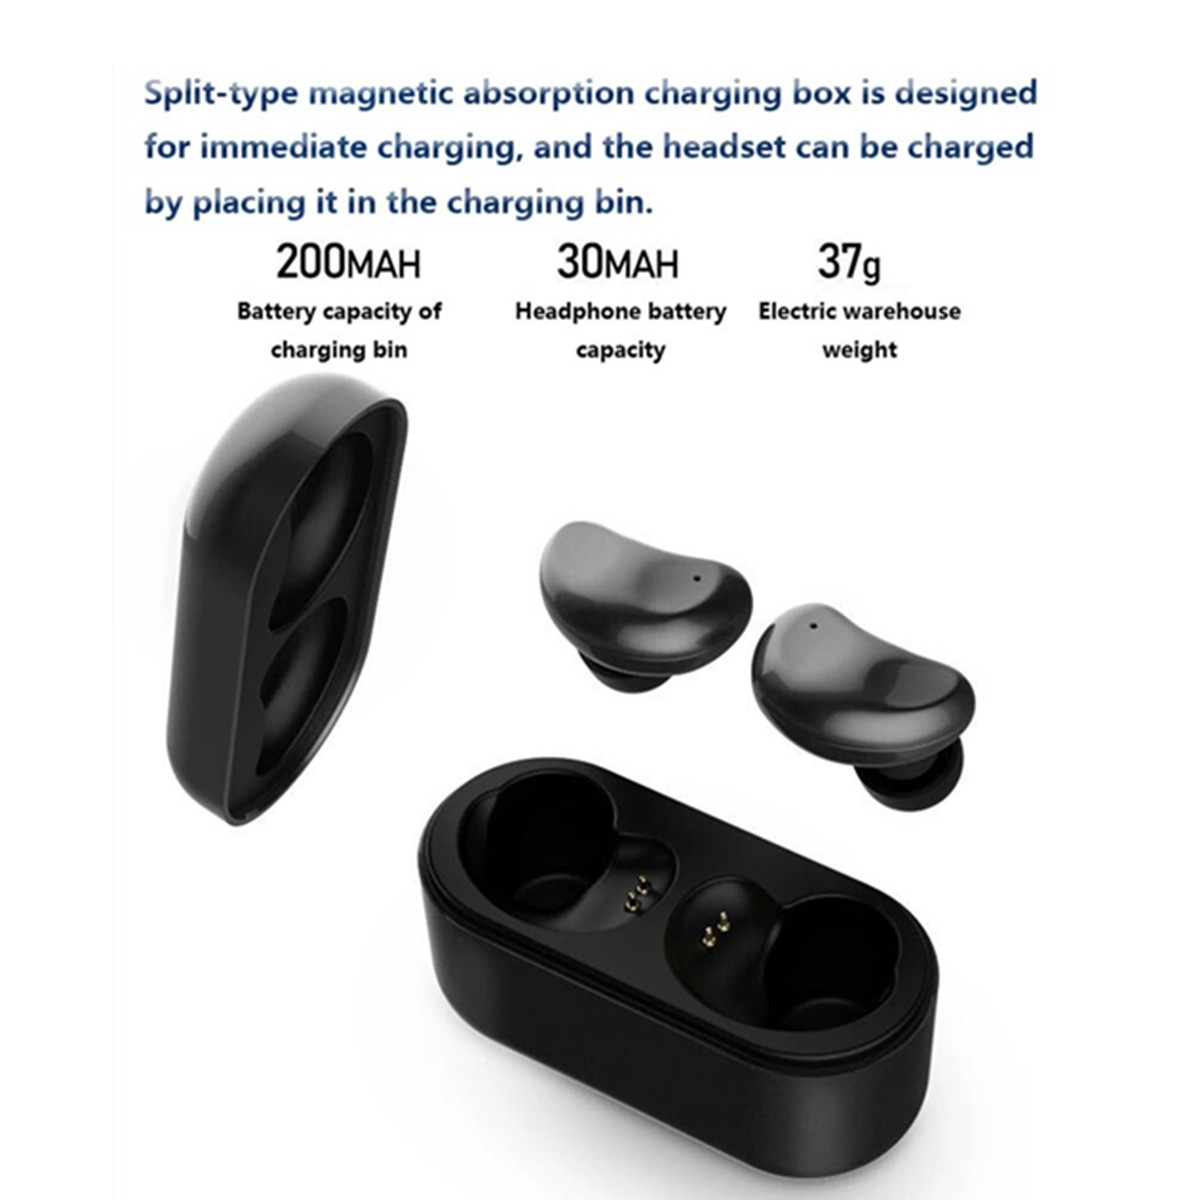 REMAX-TWS-5-bluetooth-50-Stereo-True-Wireless-Earbuds-Touch-Music-Handsfree-Earphone-With-HD-Mic-1459655-2